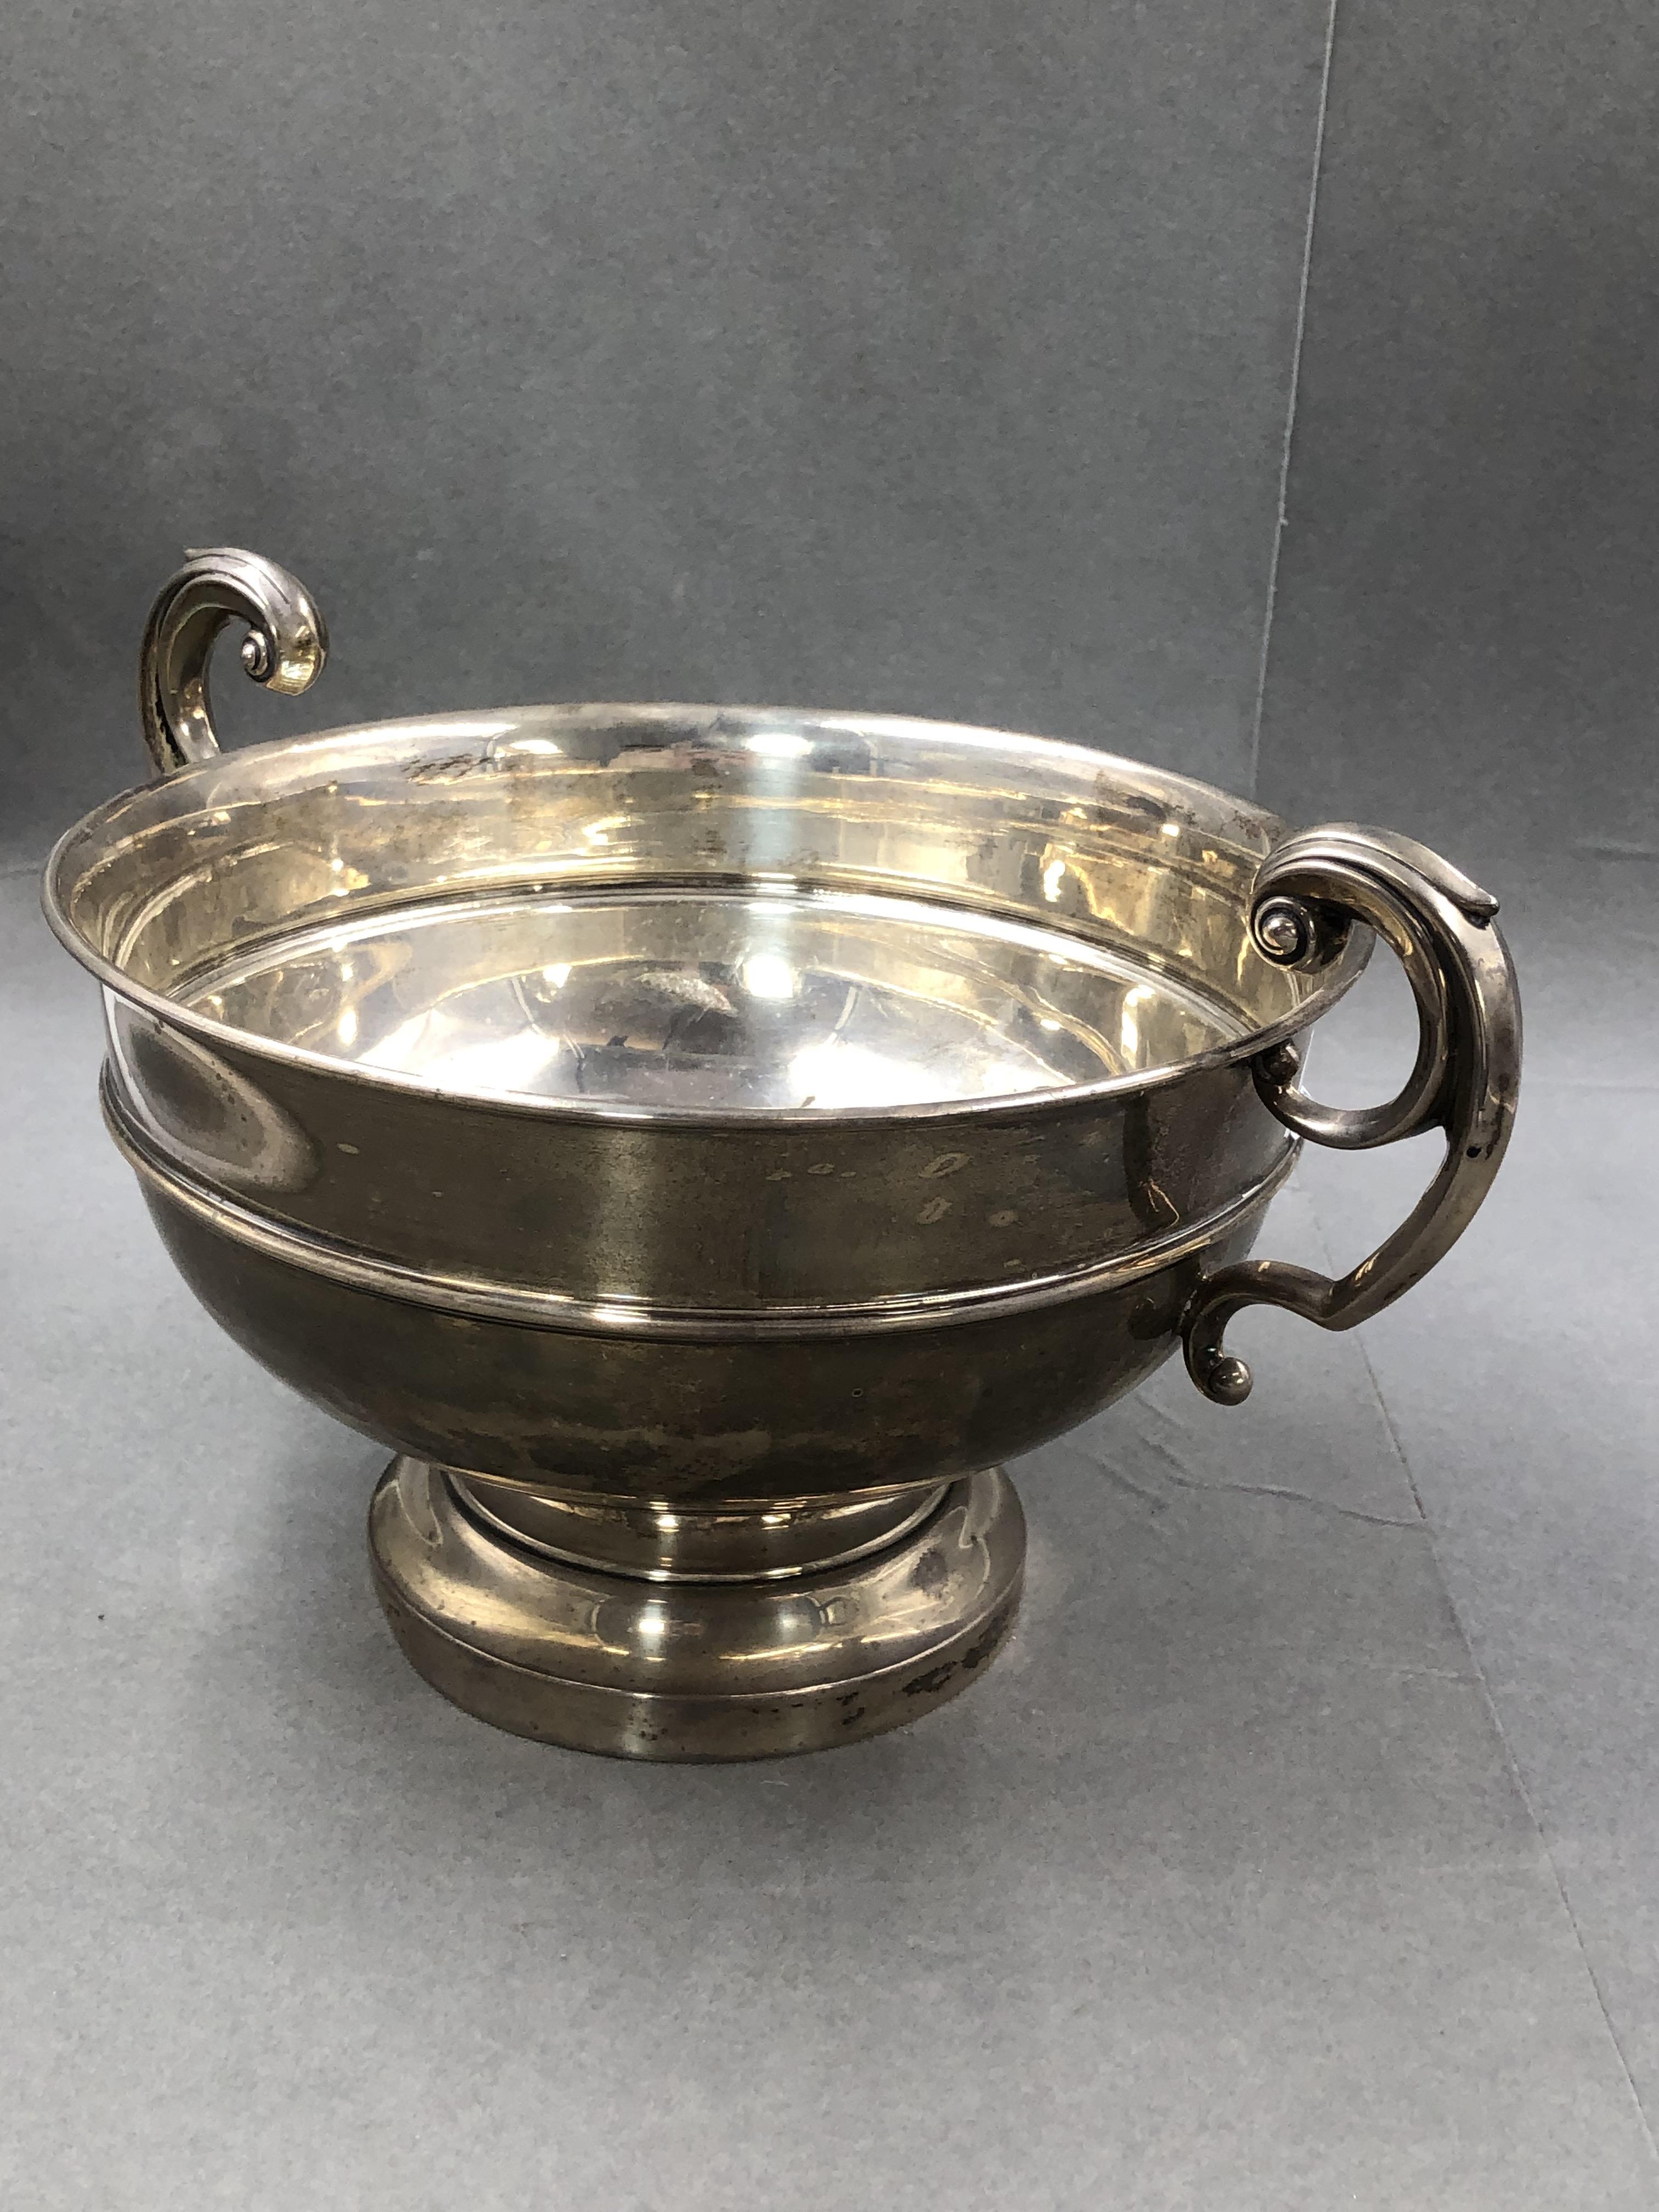 A VICTORIAN HALLMARKED SILVER TWO HANDLED FOOTED BOWL, DATED 1857, SIGNED THE GOLDSMITHS & - Image 5 of 5